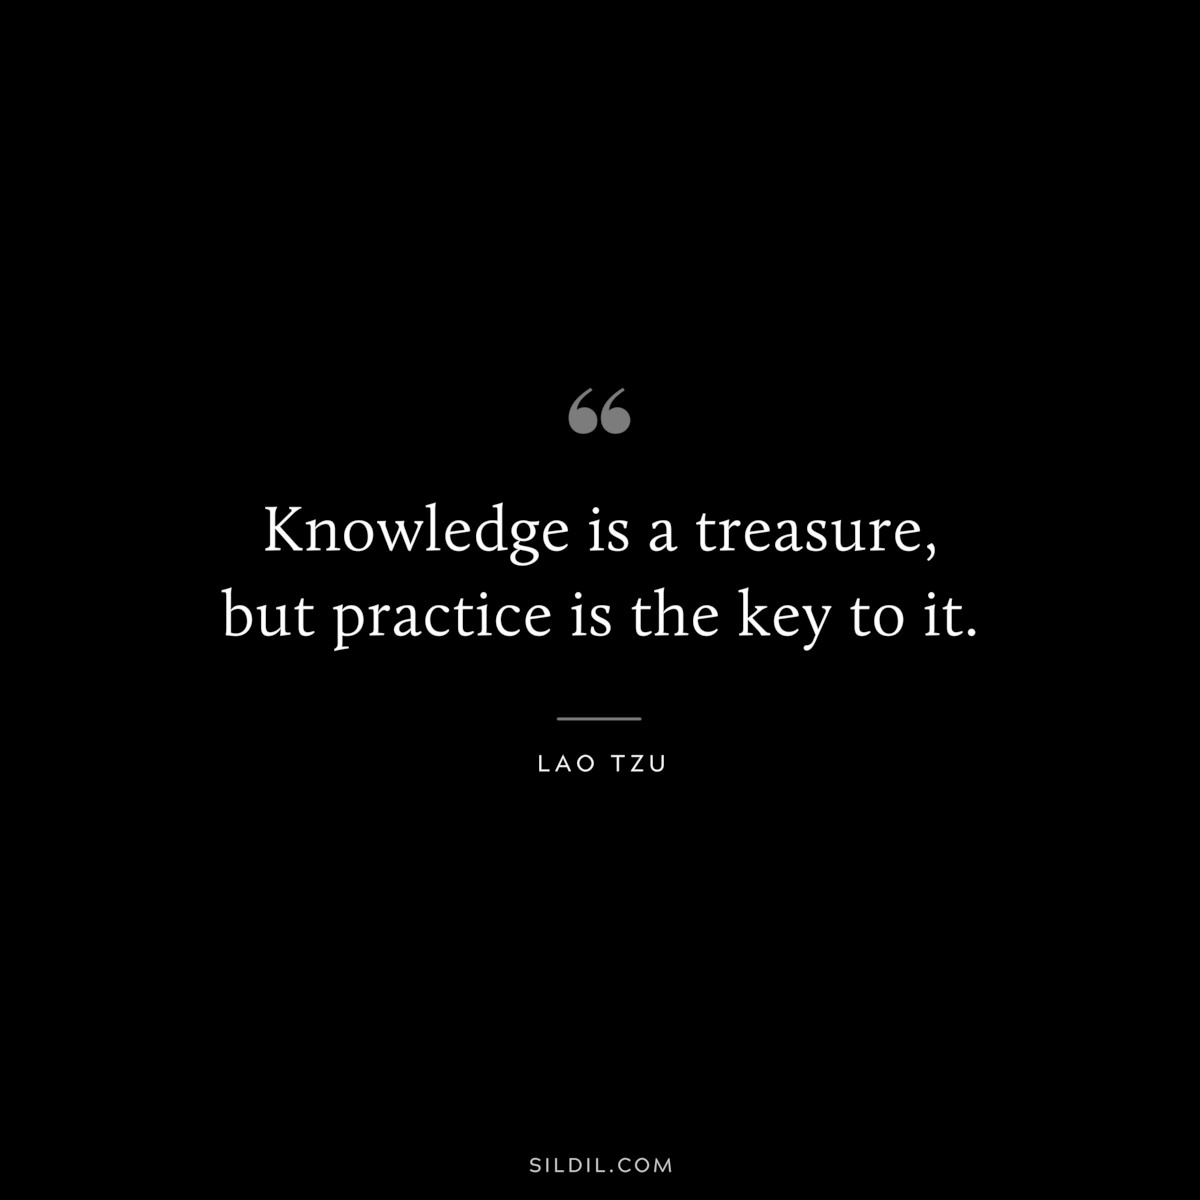 Knowledge is a treasure, but practice is the key to it. ― Lao Tzu